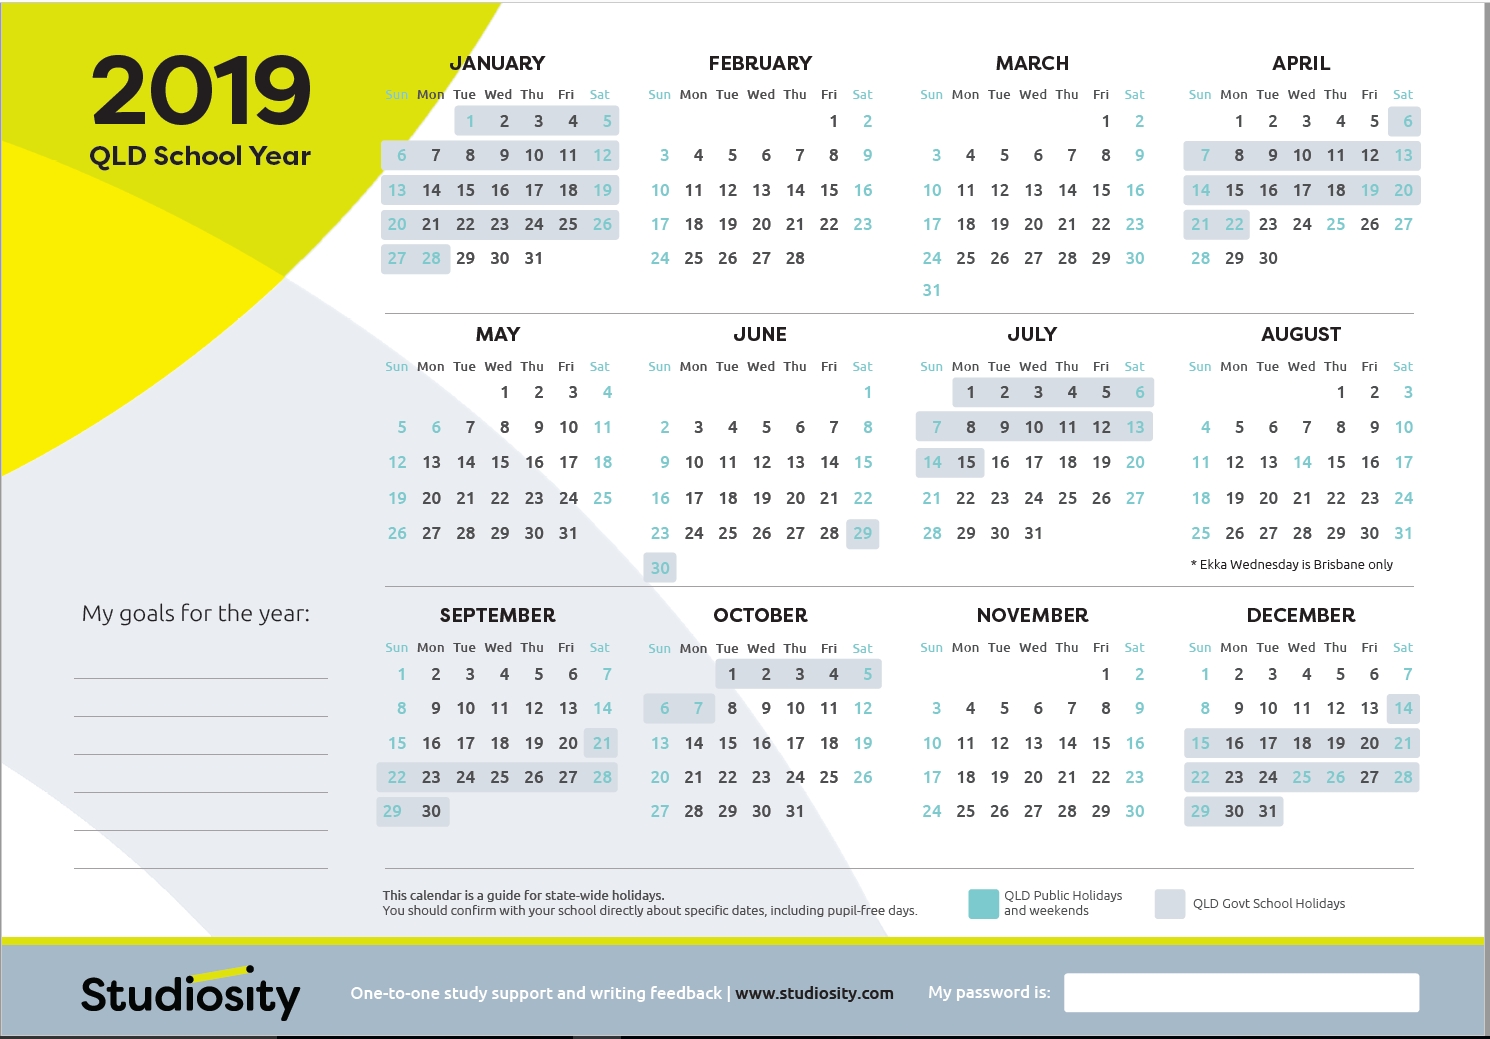 School Terms And Public Holiday Dates For Qld In 2019 | Studiosity School Year Calendar Qld